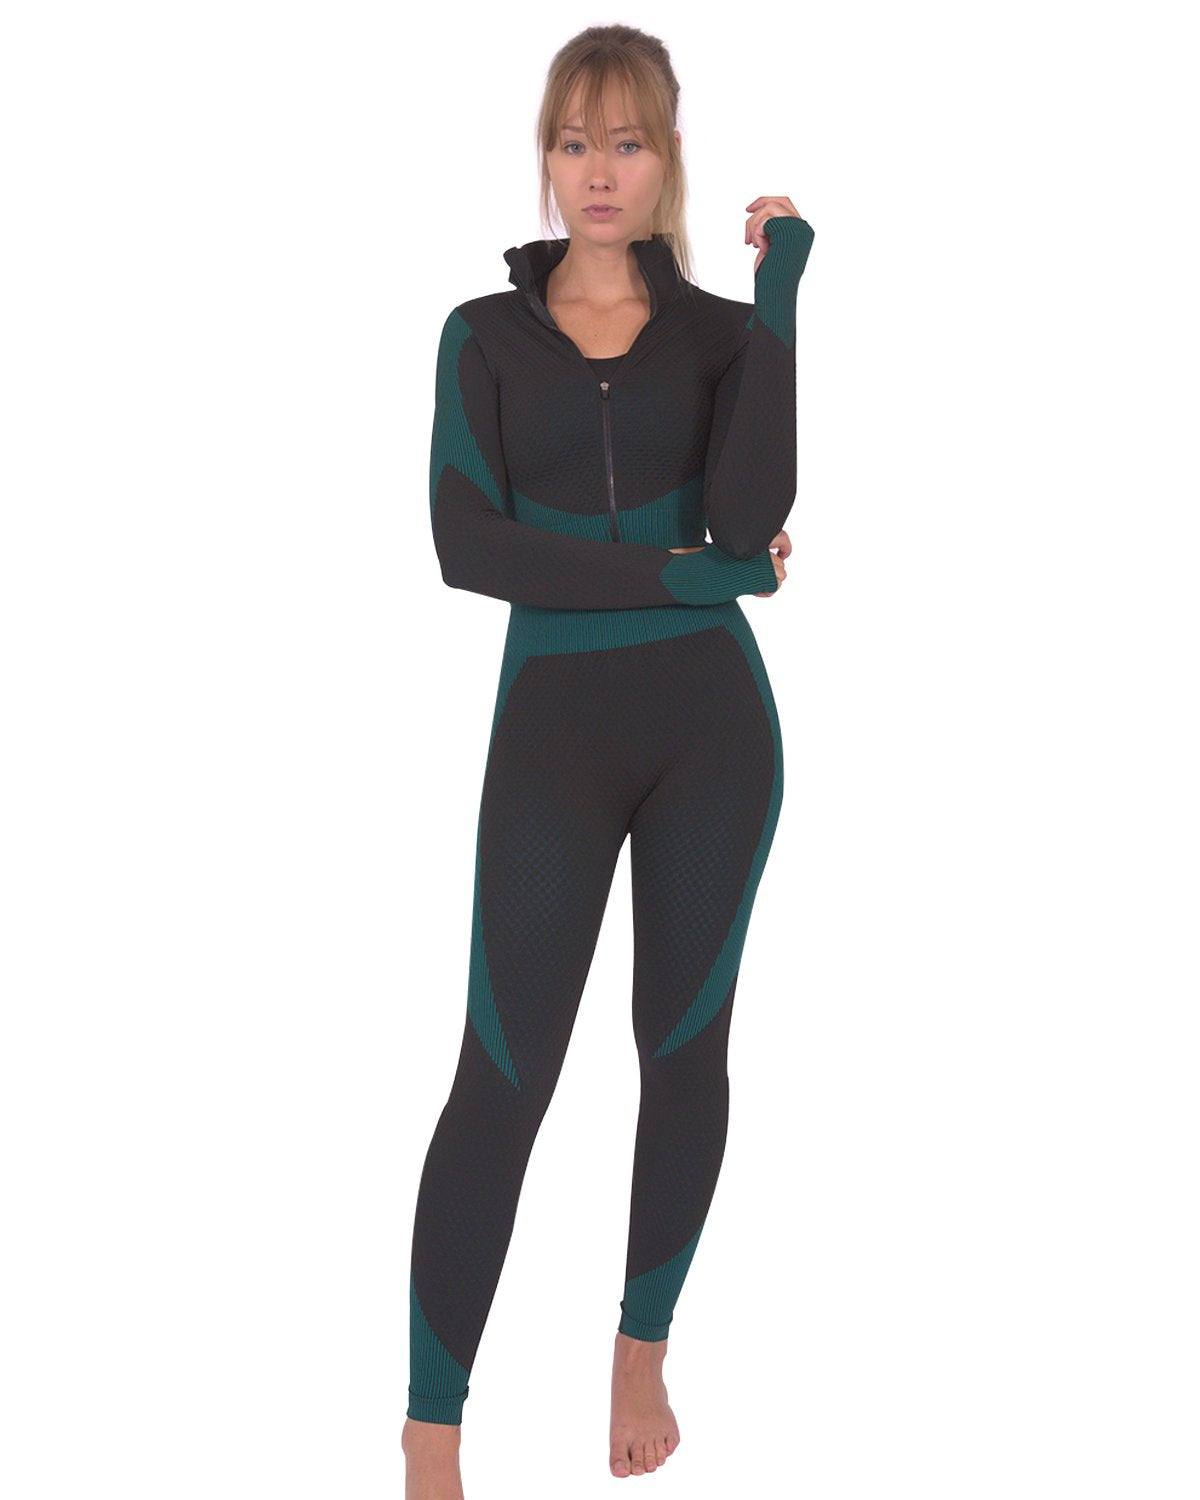 Trois Seamless Jacket, Leggings & Sports Top 3 Set - Black with Teal Blue